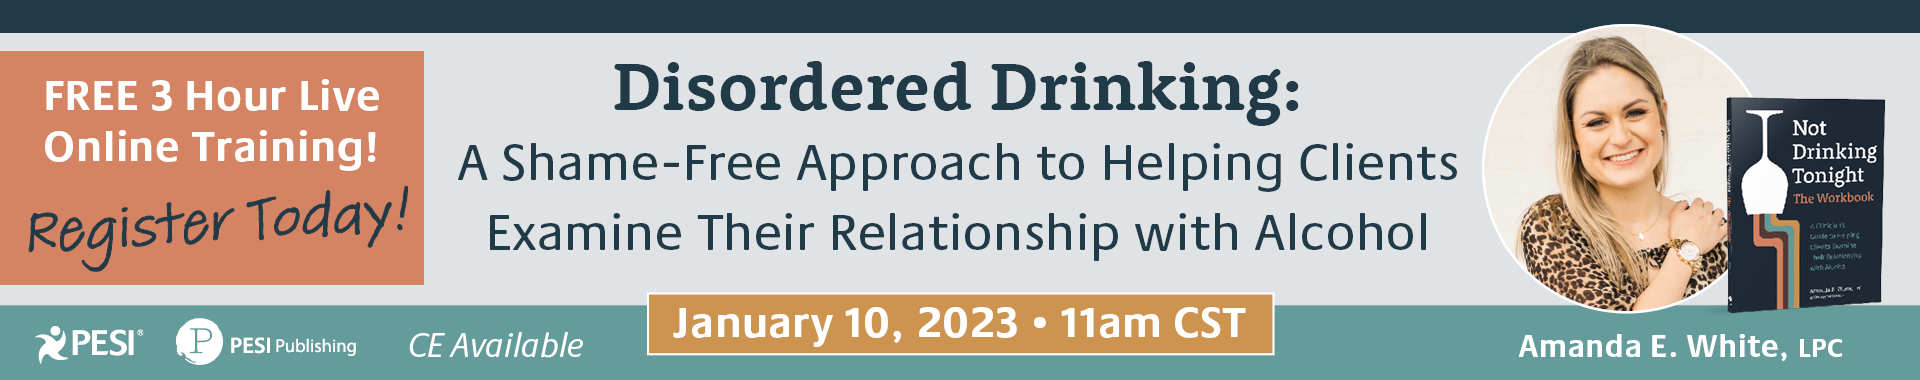 Disordered Drinking: A Shame-Free Approach to Helping Clients Examine Their Relationship with Alcohol